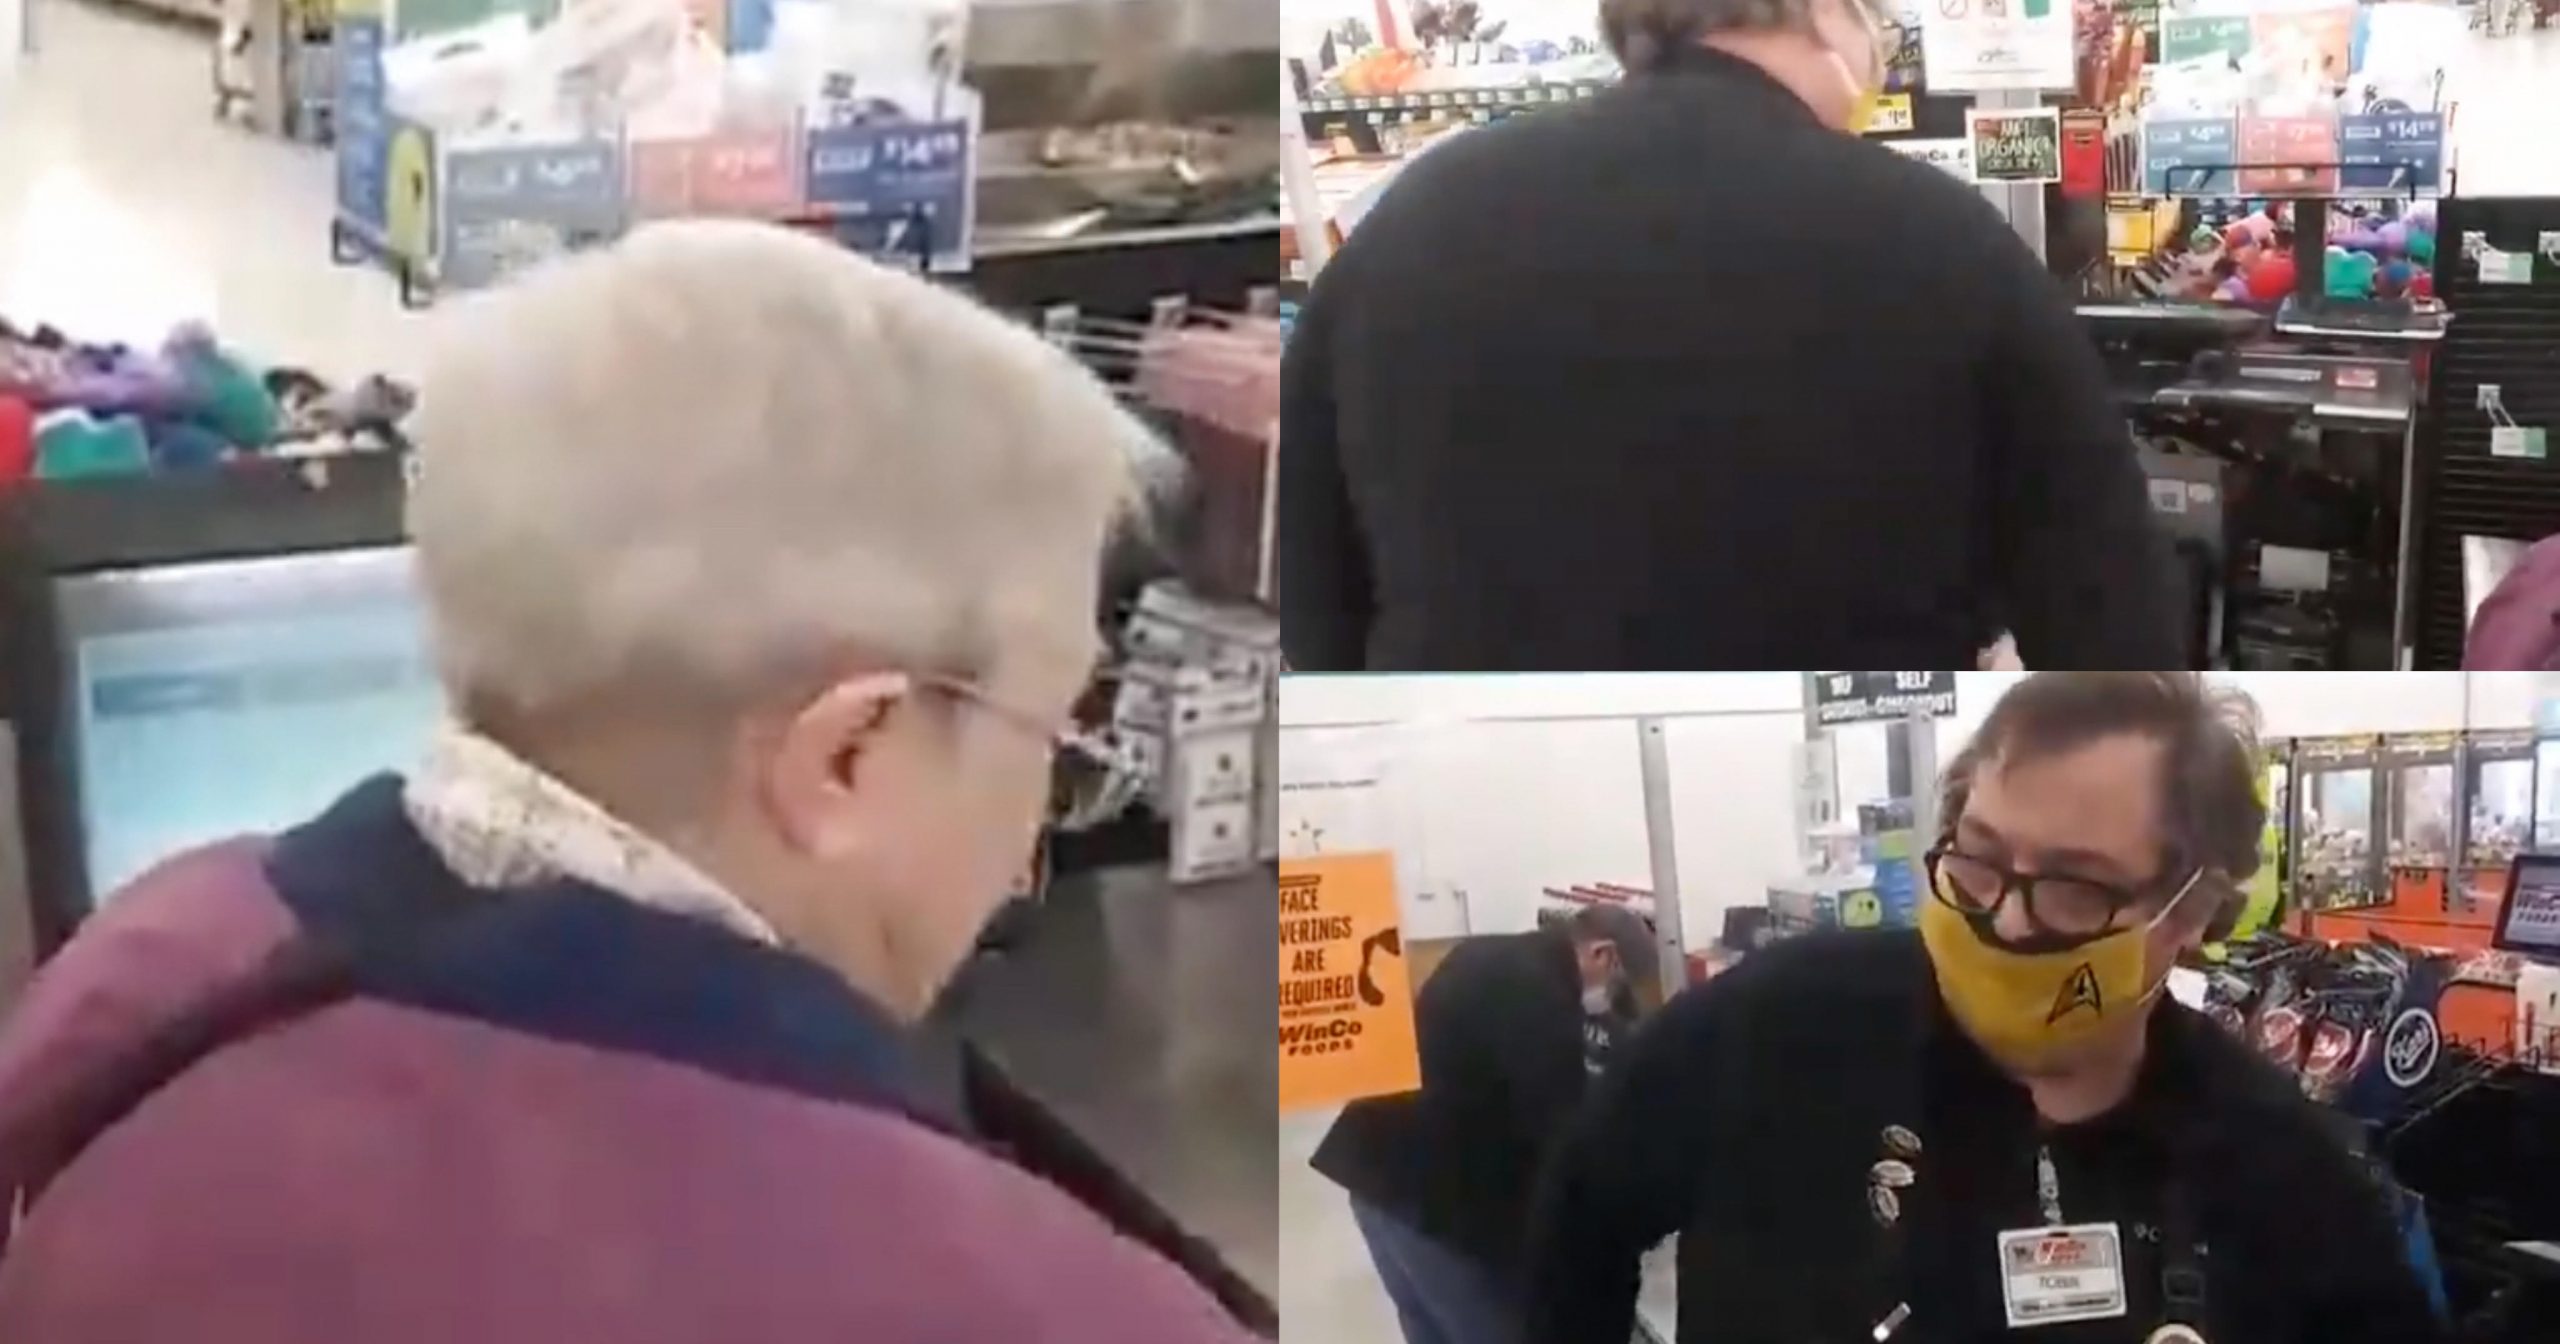 WinCo Foods in Oregon Turns off Self Checkout on Elderly Woman Trying to Check Out With Groceries Over Mask Rules - Media Right News